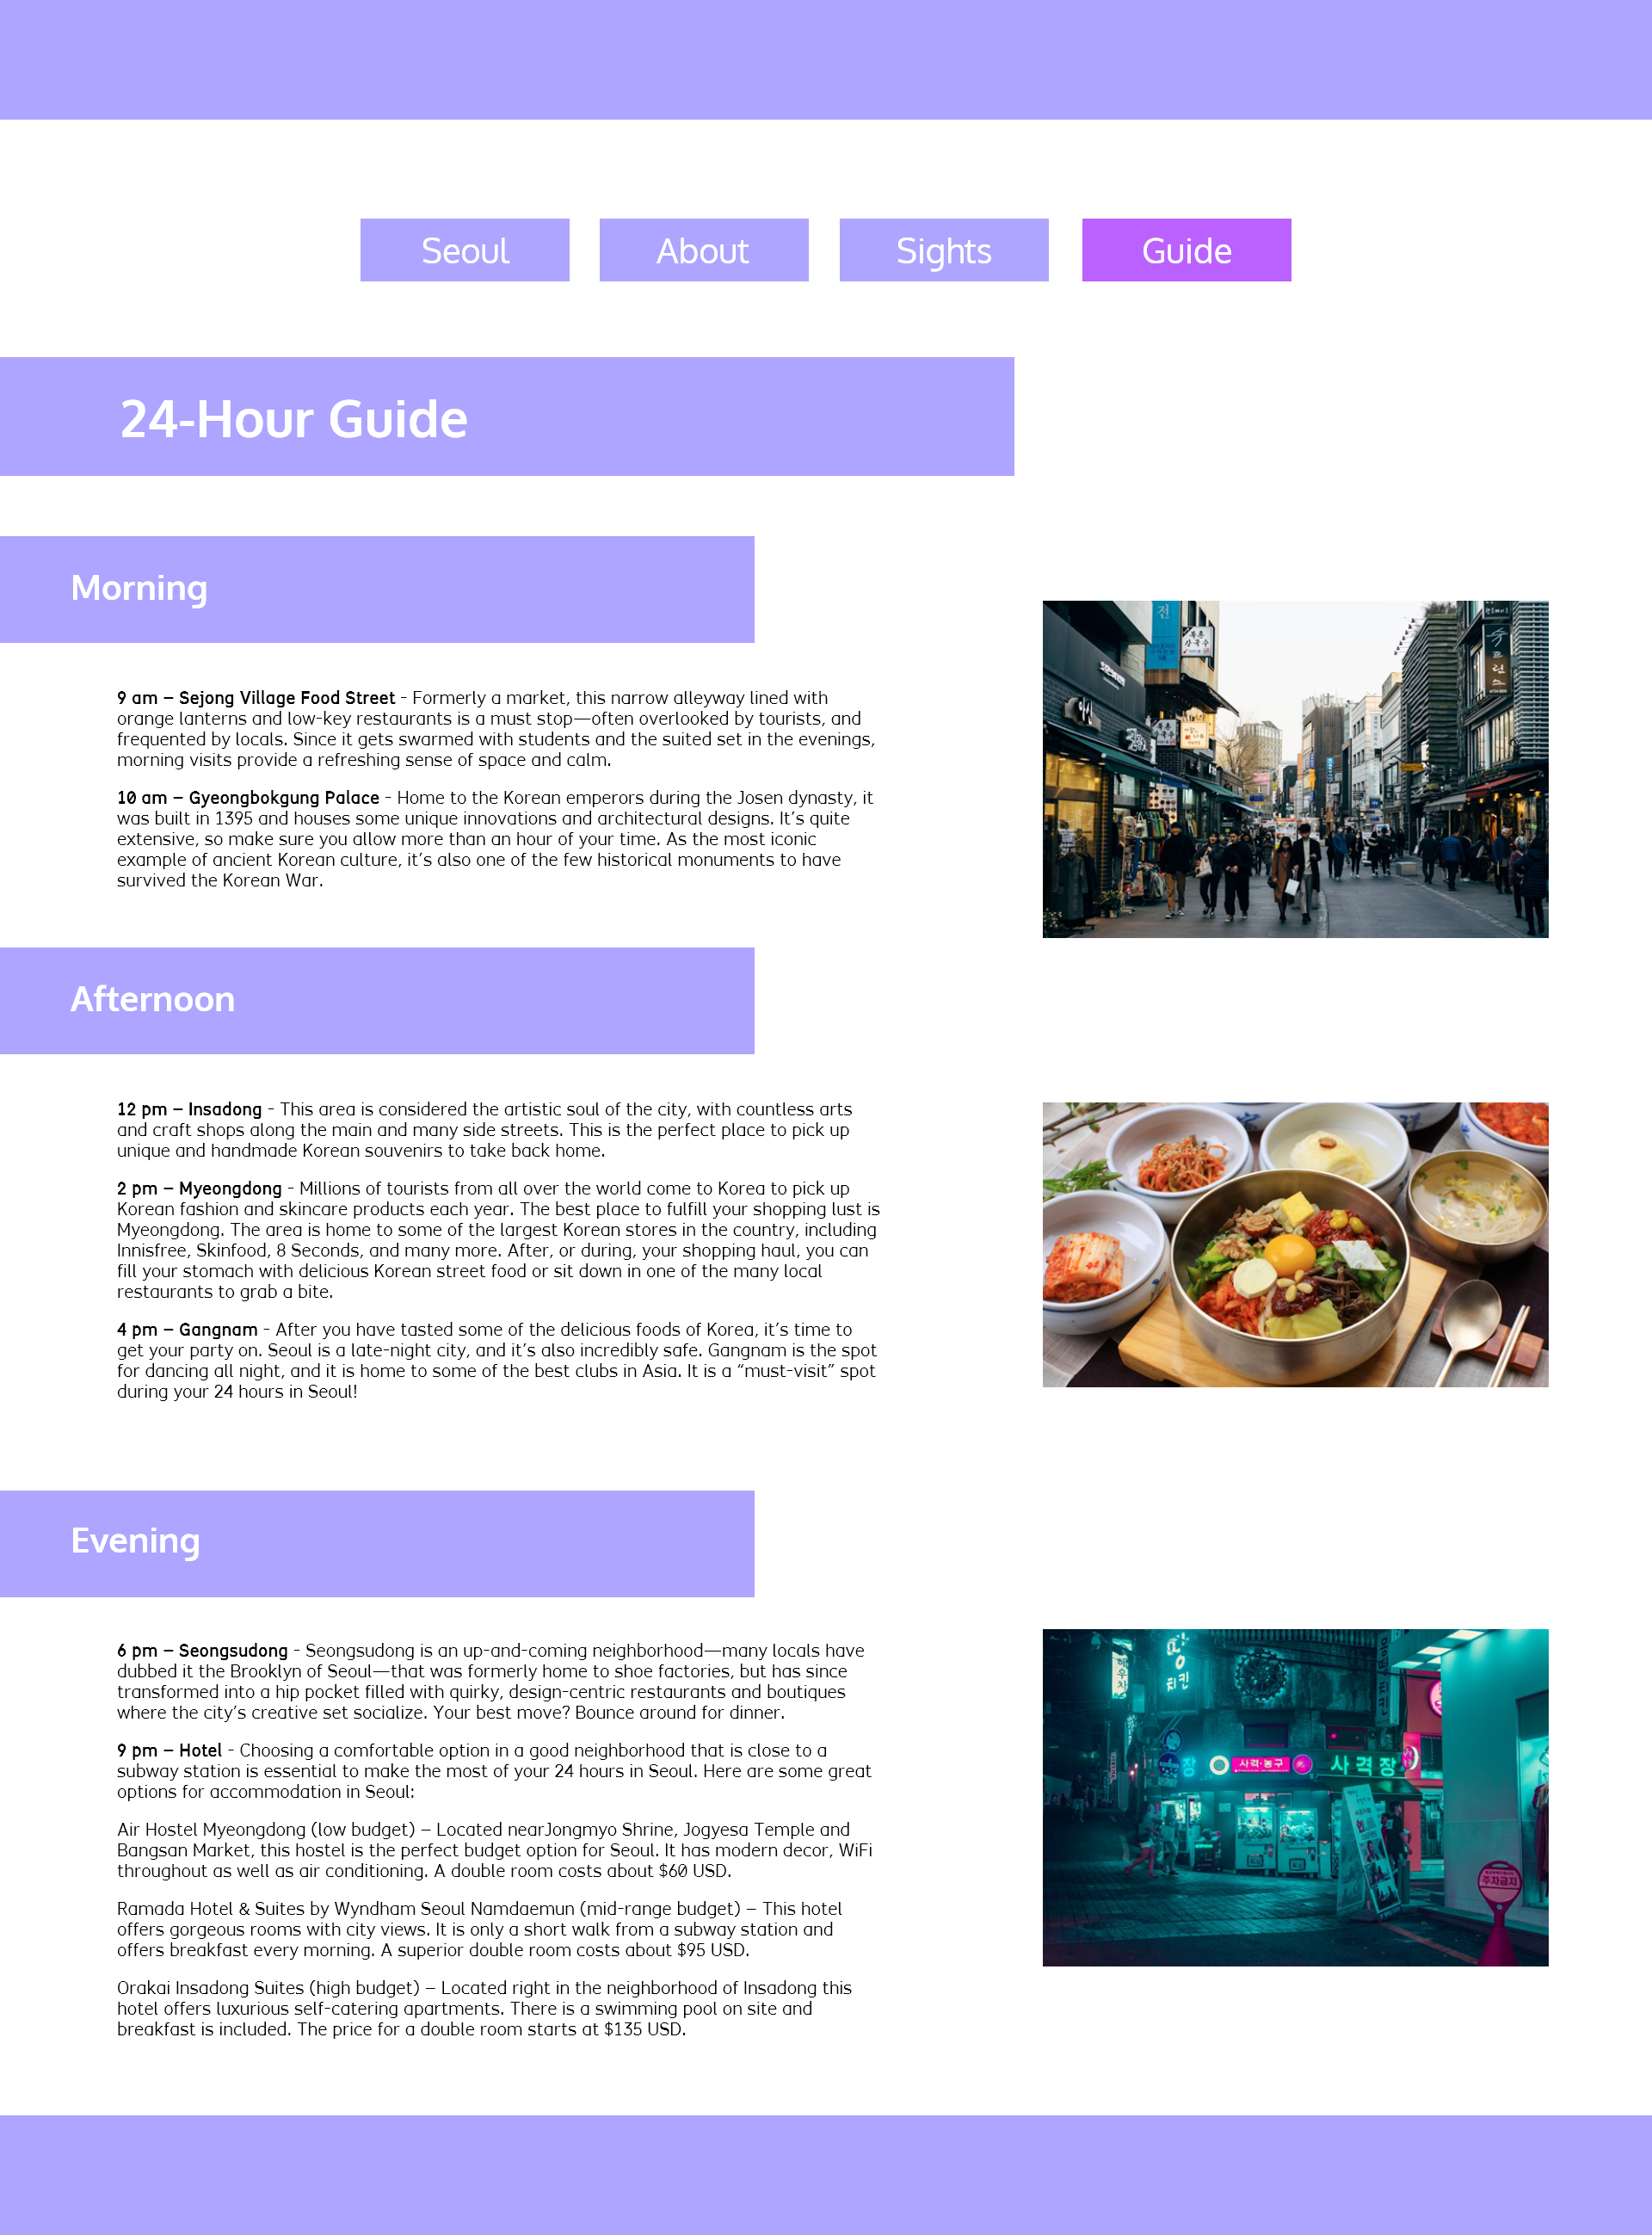 guide page